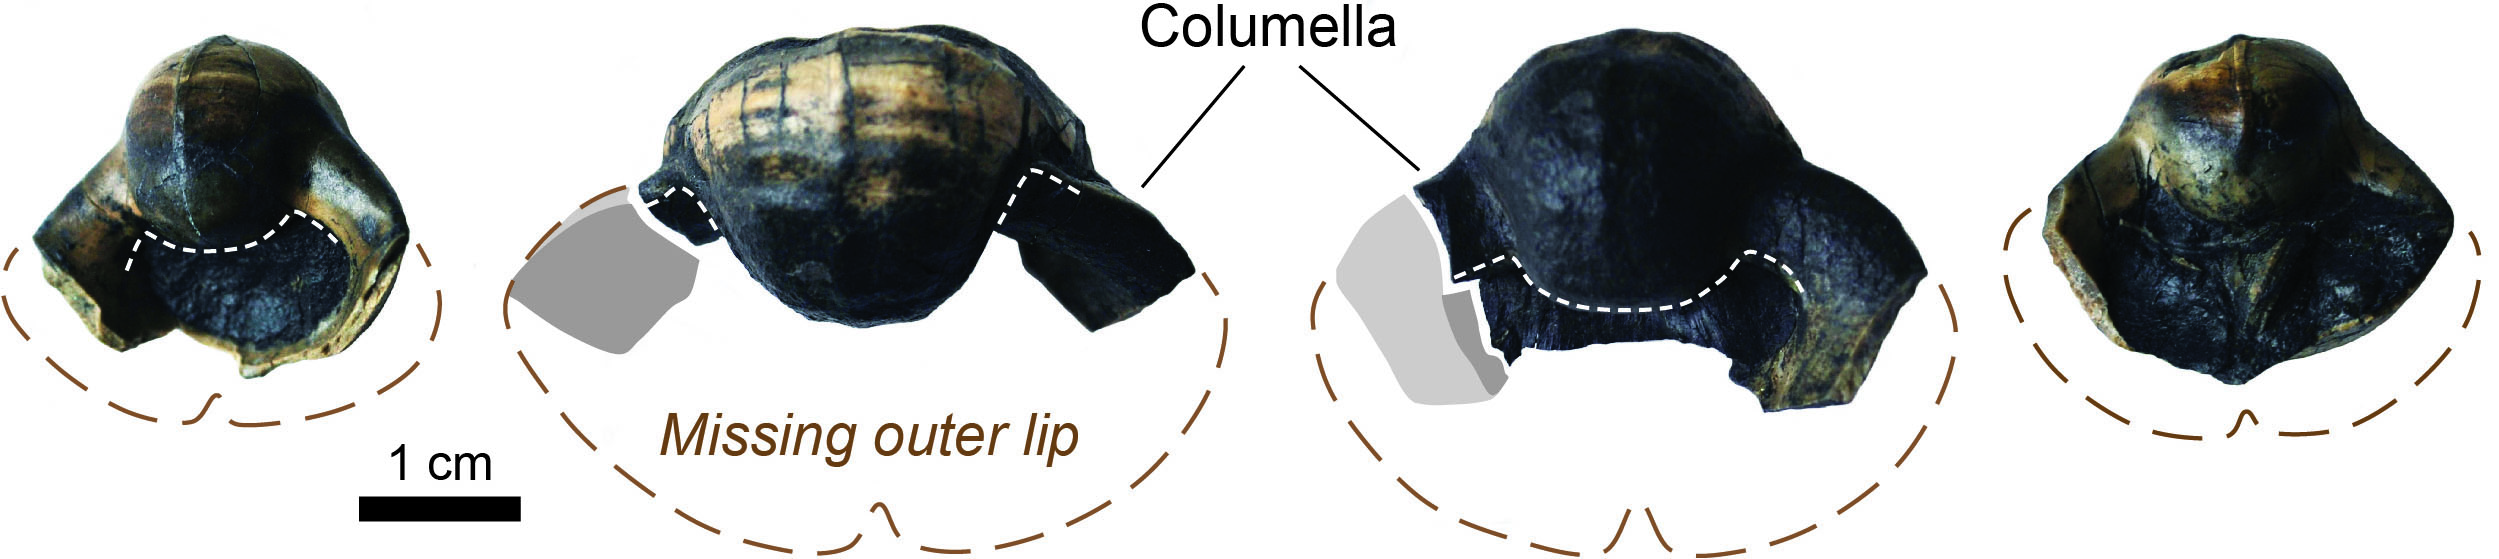 Examples of preserved columella support structures in several specimens of Bellerophon (Pharkidonotus) from eastern Kentucky, which show the outer lip of their shells extended further outward than is preserved. 